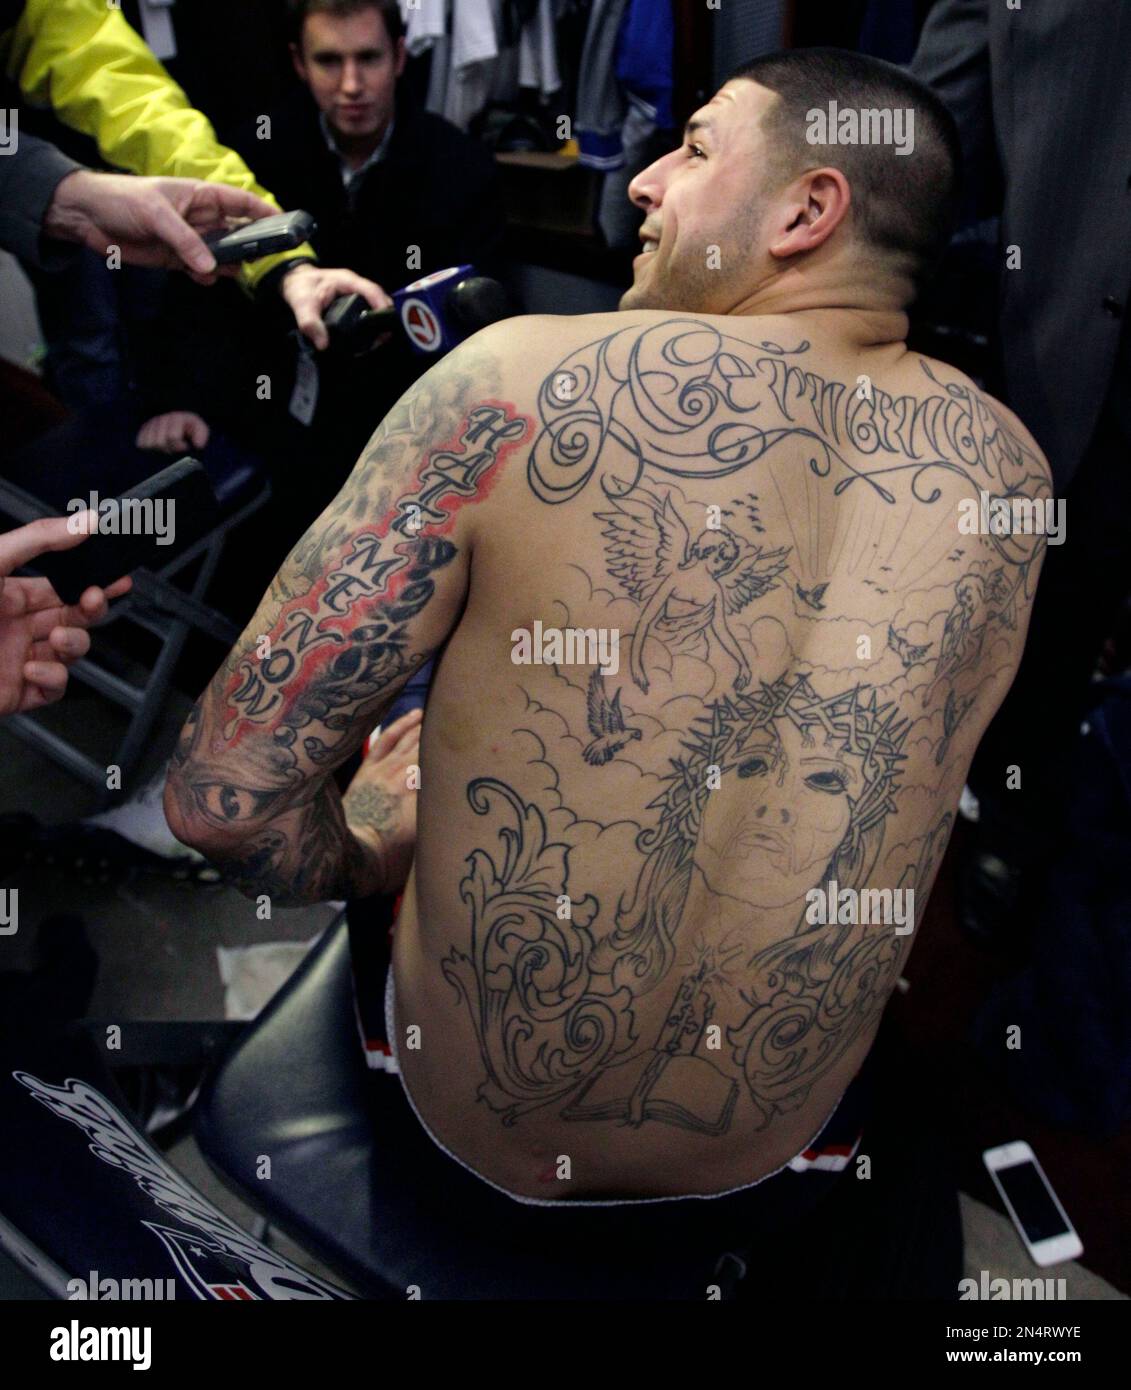 FILE - In this Jan. 27, 2012, file photo, then-New England Patriots tight end Aaron Hernandez talks to reporters at his locker after NFL football practice in Foxborough, Mass. Investigators asked for help from tattoo artists who may have inked Hernandez, saying they could help in the prosecution of a double murder Hernandez is charged with committing in 2012. The Suffolk district attorney's office stressed that the tattoo artists are considered witnesses, not suspects, and "may have made observations of evidentiary value." AP Photo/Elise Amendola, File) Stock Photo